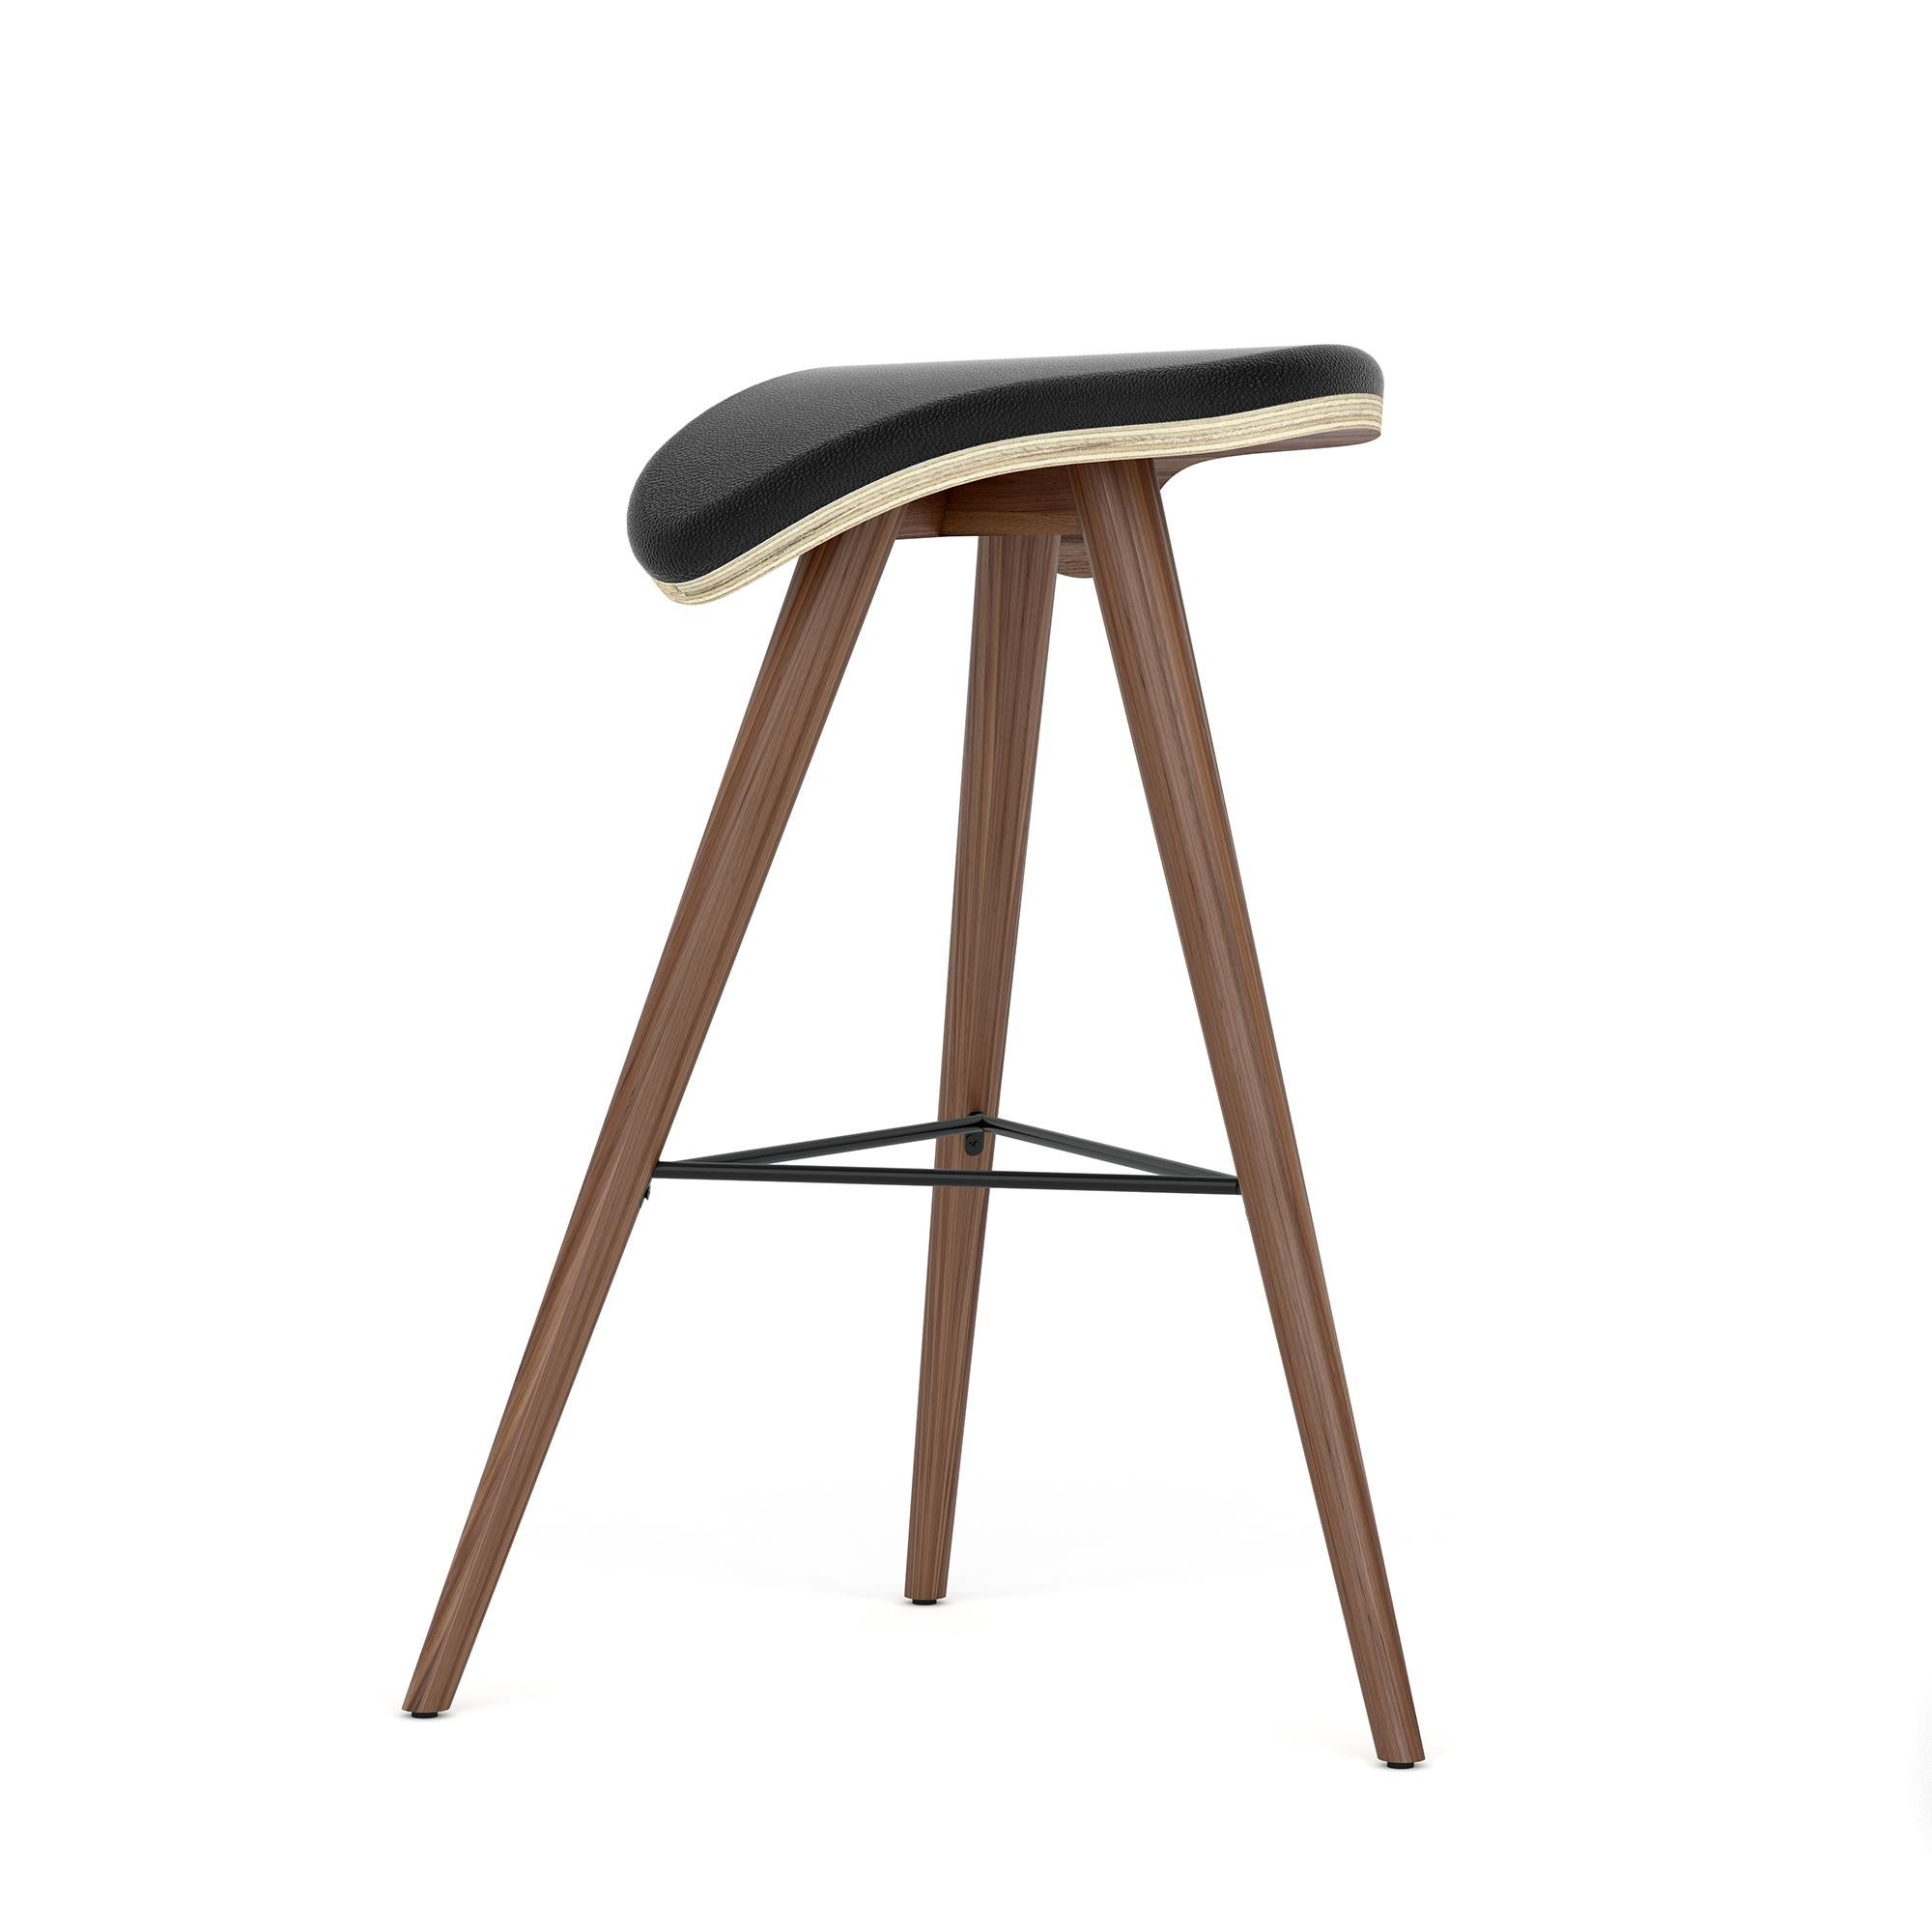 It is all about stances. The Horse stool, inspired by a horse settle, intends to have a different ergonomic concept that usual, providing a new feeling to whom sits in it and a new approach at the counter.

No matter the type of counter, there